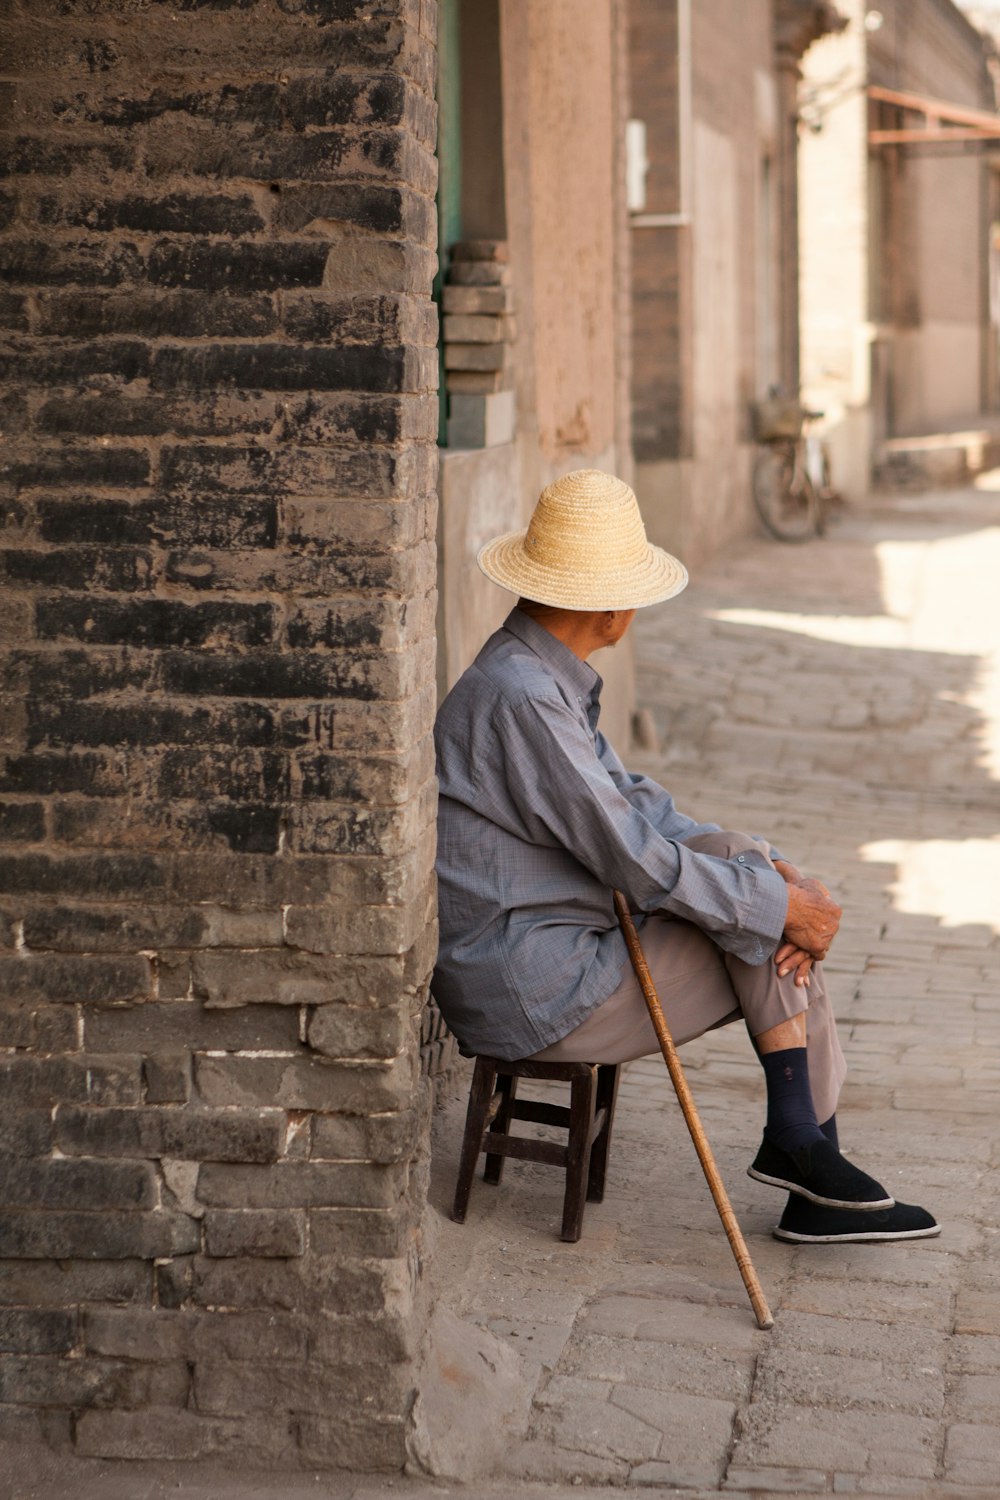 a person sitting on a chair with a cane